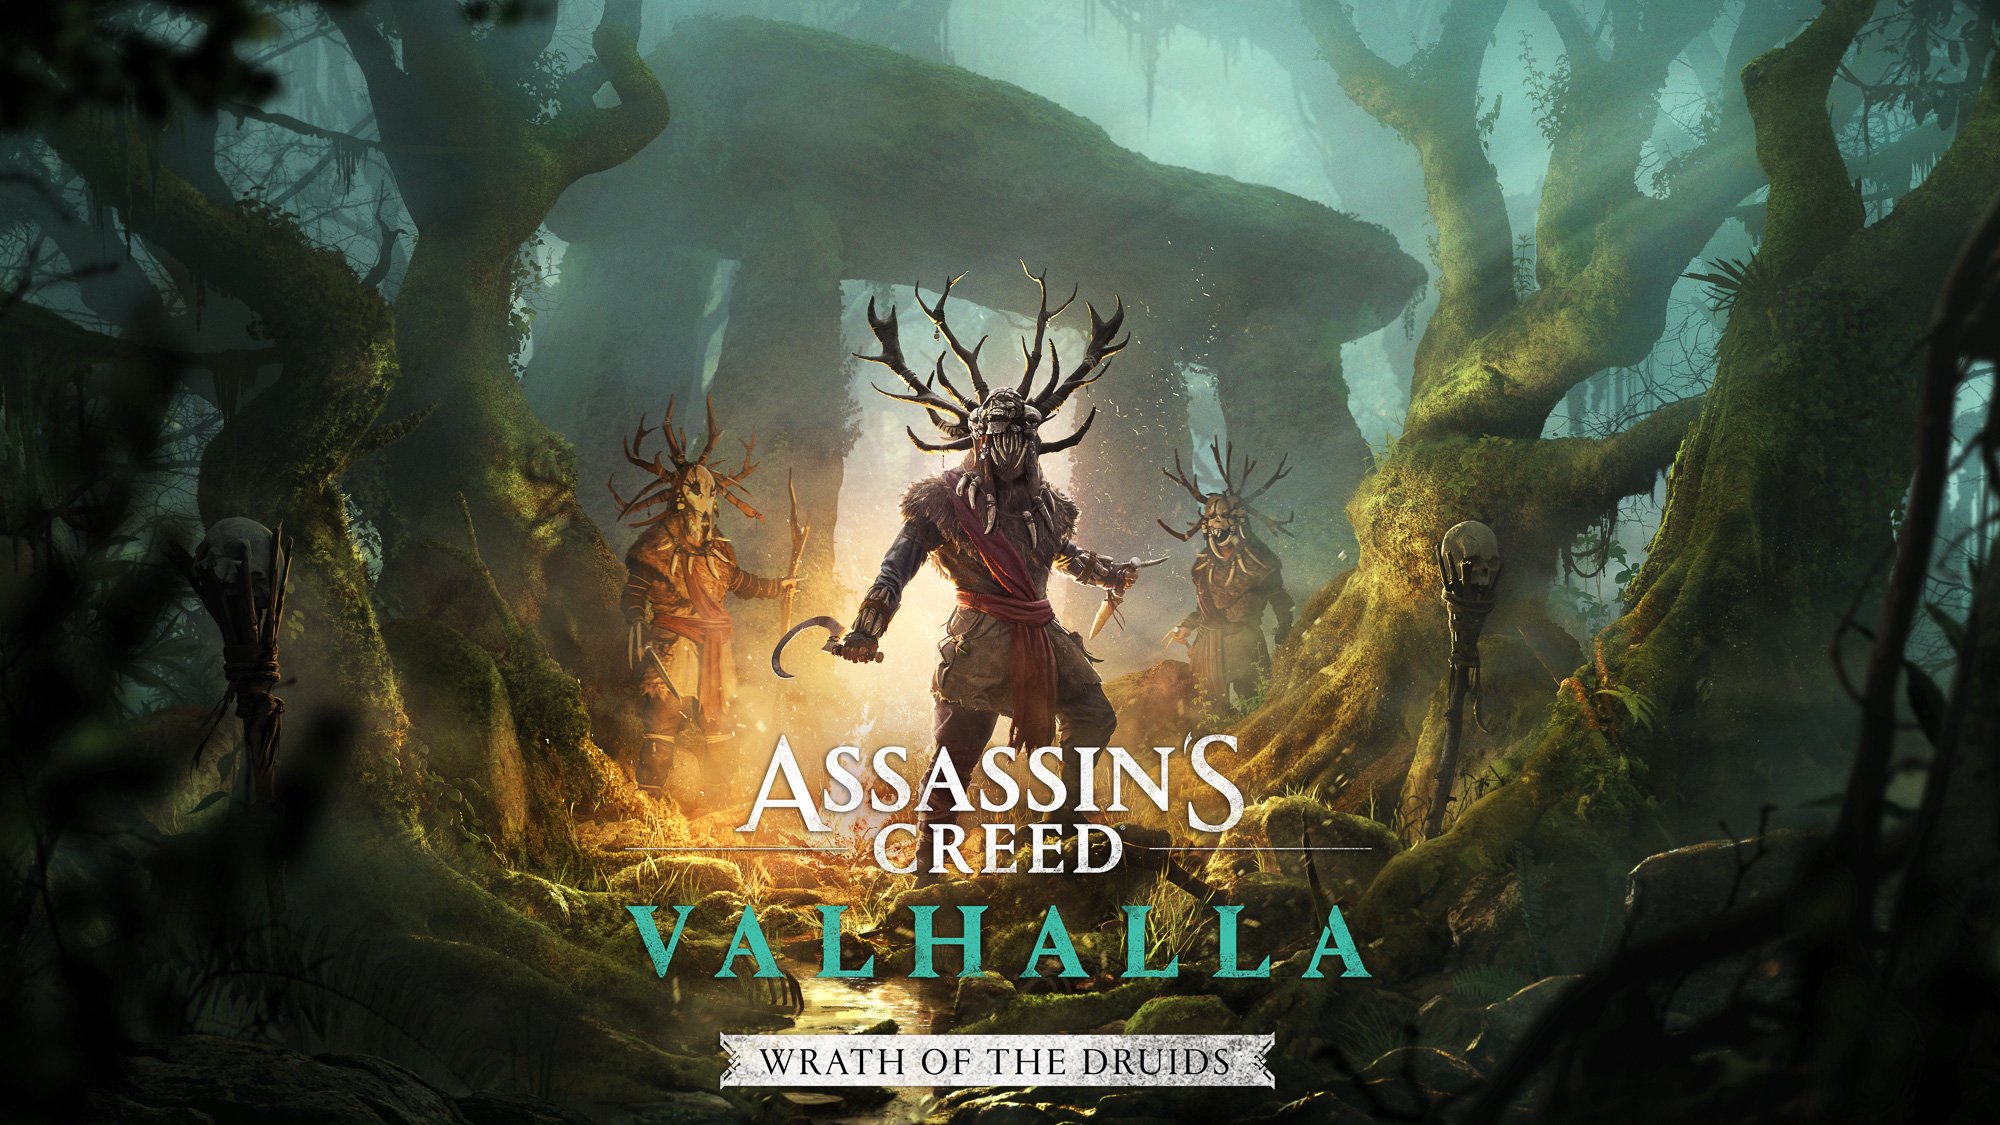 Assassin's Creed Valhalla Post-Launch Announcement